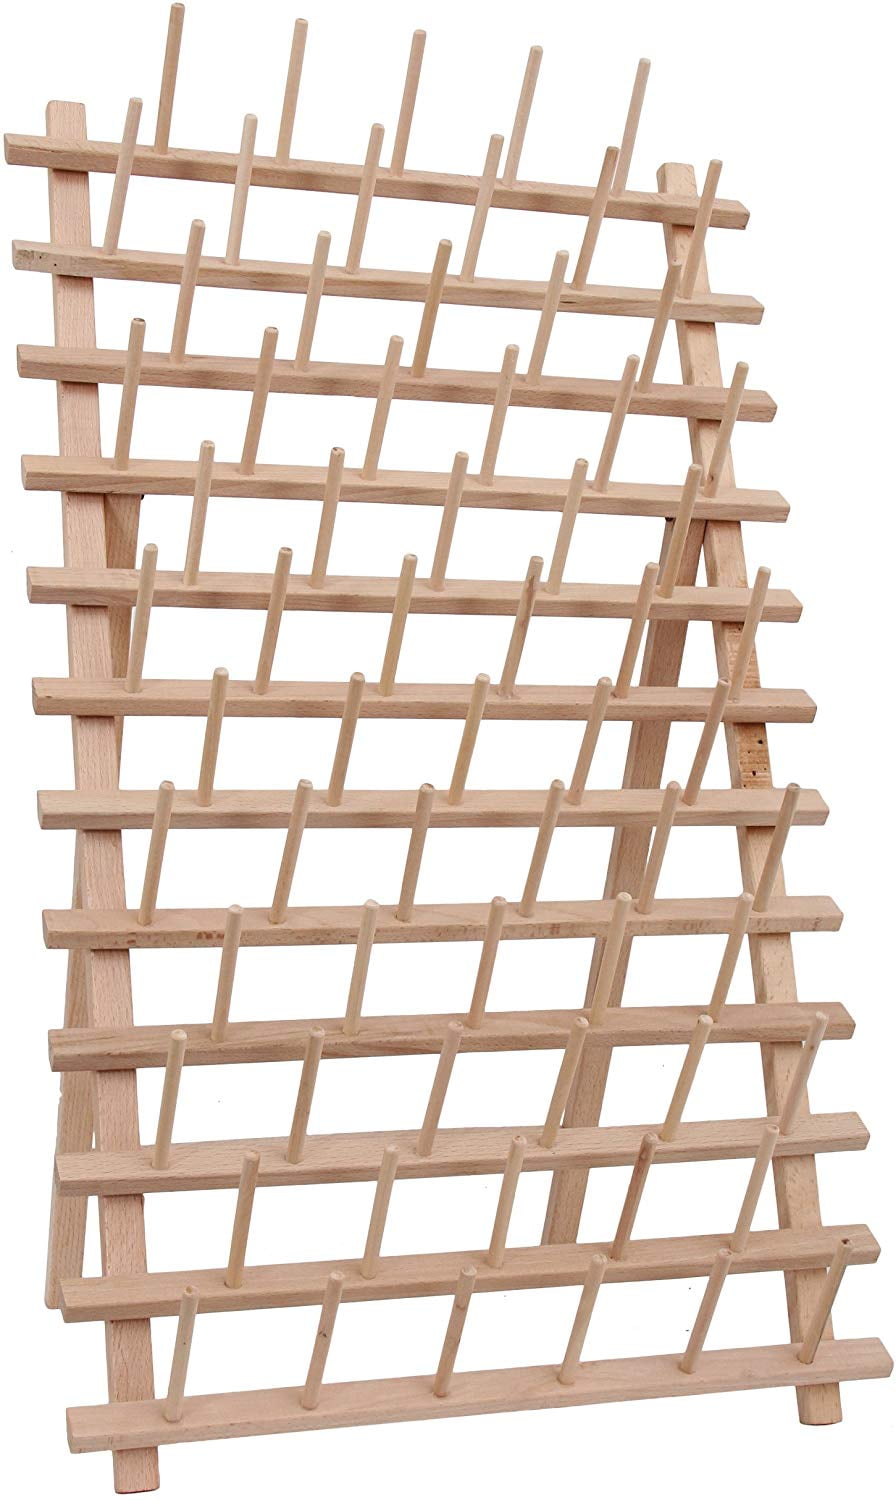 30 Spool Thread Rack for Table Top or Wall